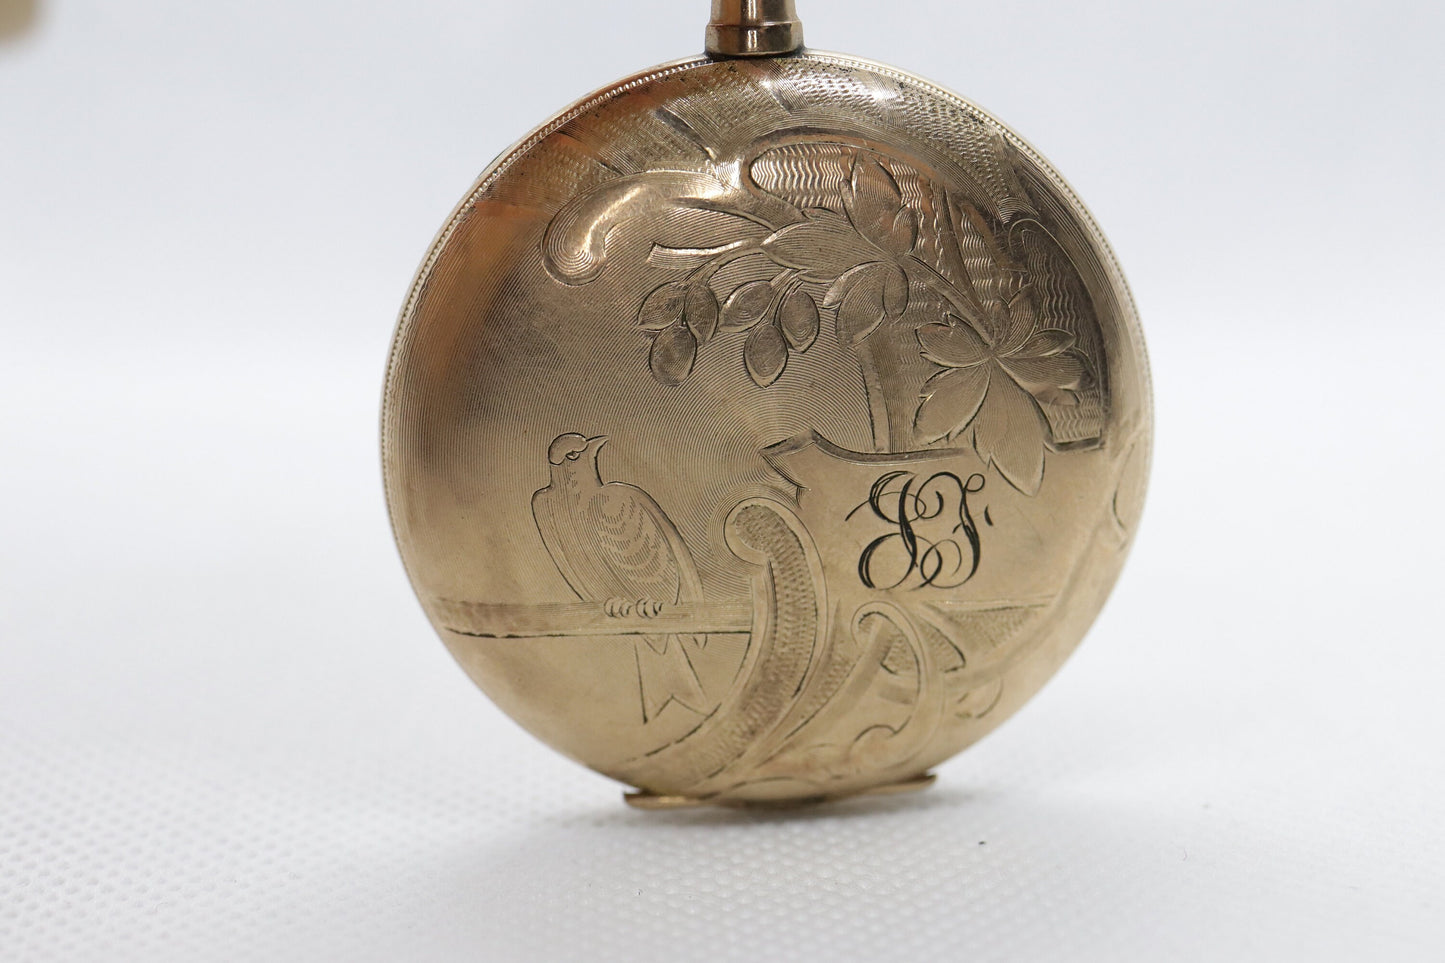 Illinois Central Pocket Watch. Gold Tone Embossed Pocket Watch